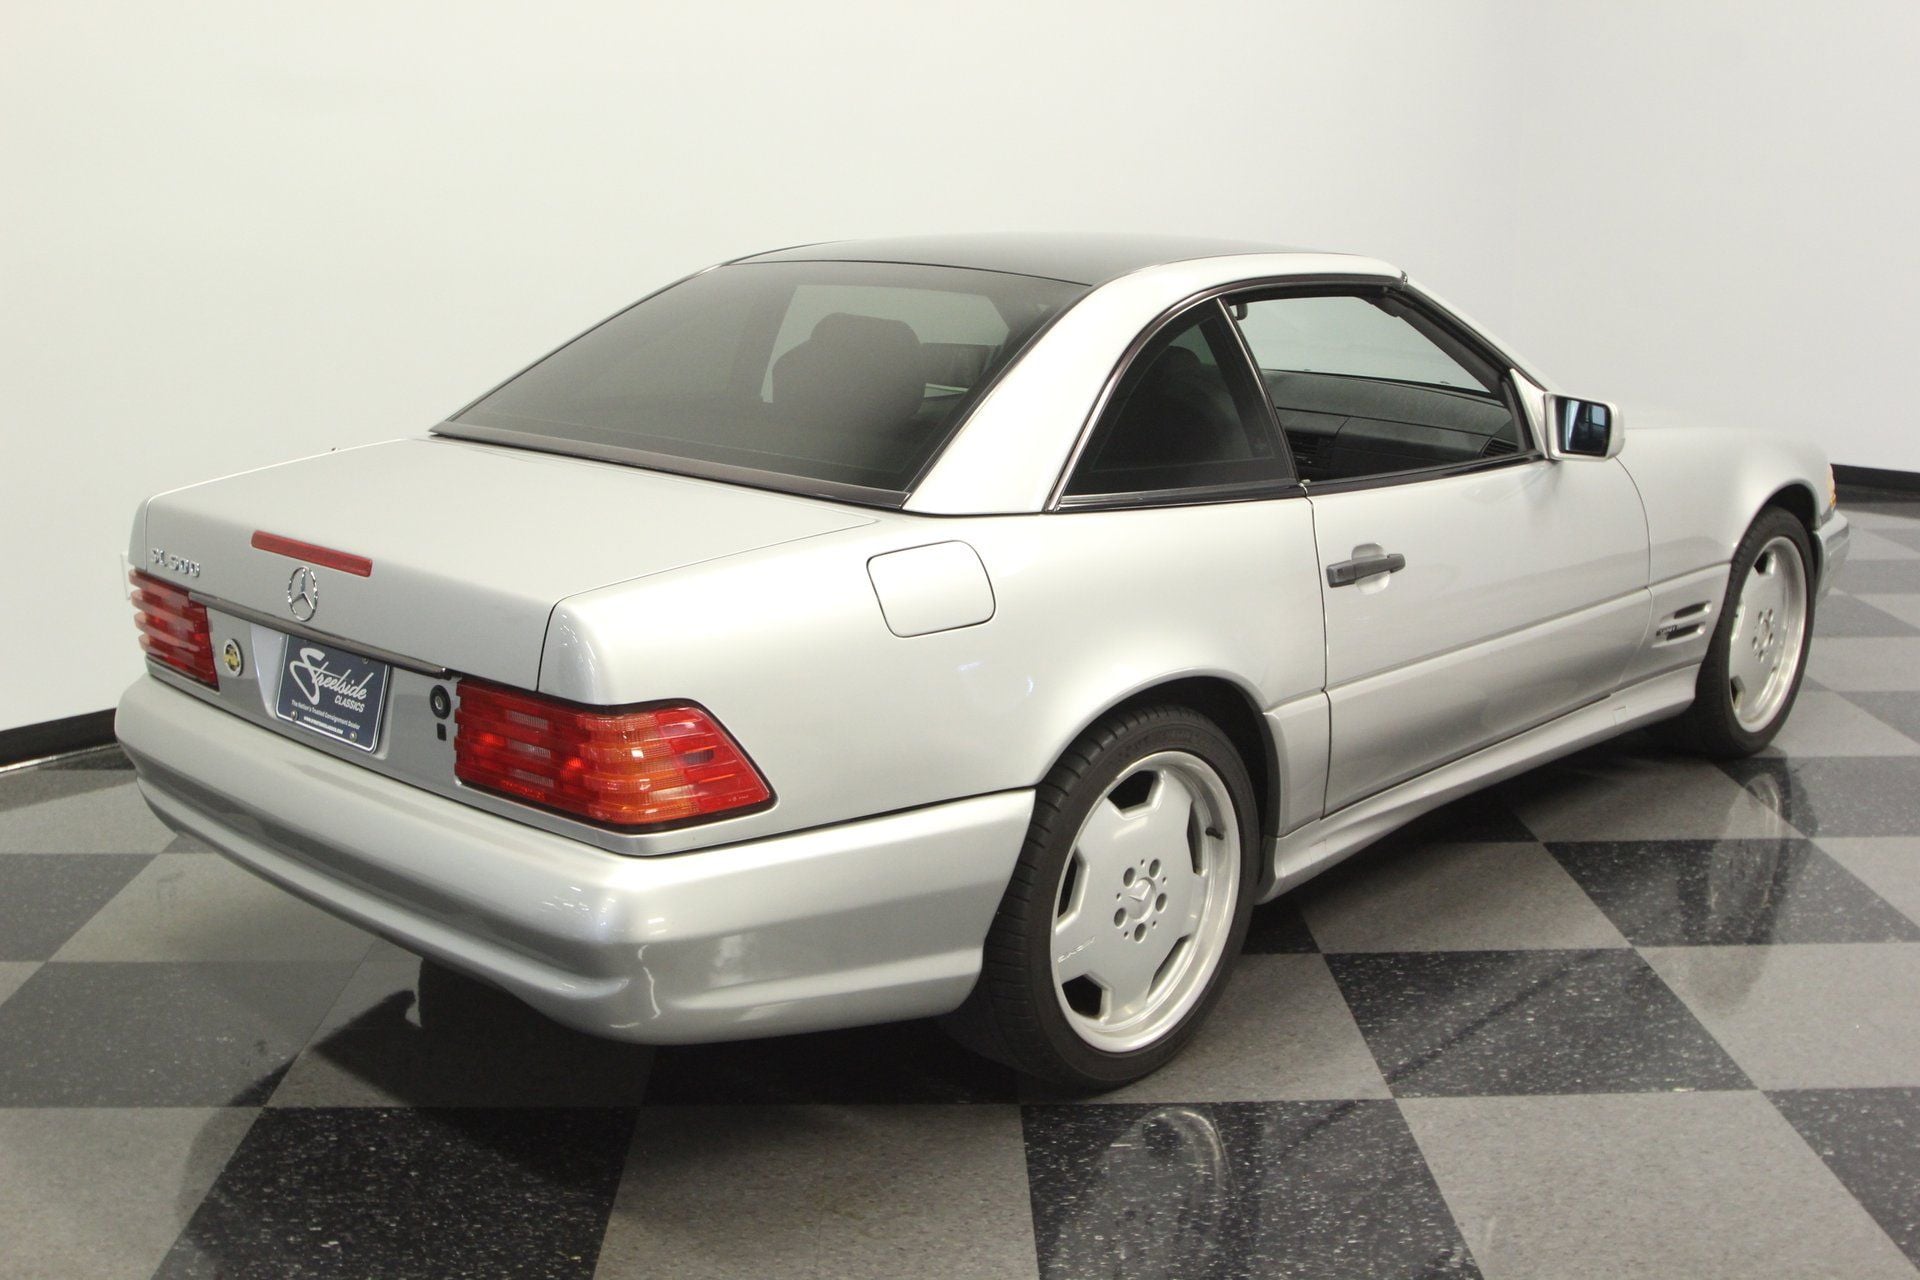 1997 Mercedes-Benz SL500 - 97 SL 500 sport Panorama Rood AMG monochrome’s and HID headlights - Used - VIN WDBFA67F7VF146421 - 73,200 Miles - 8 cyl - 2WD - Automatic - Convertible - Silver - West Bloomfield, MI 48323, United States